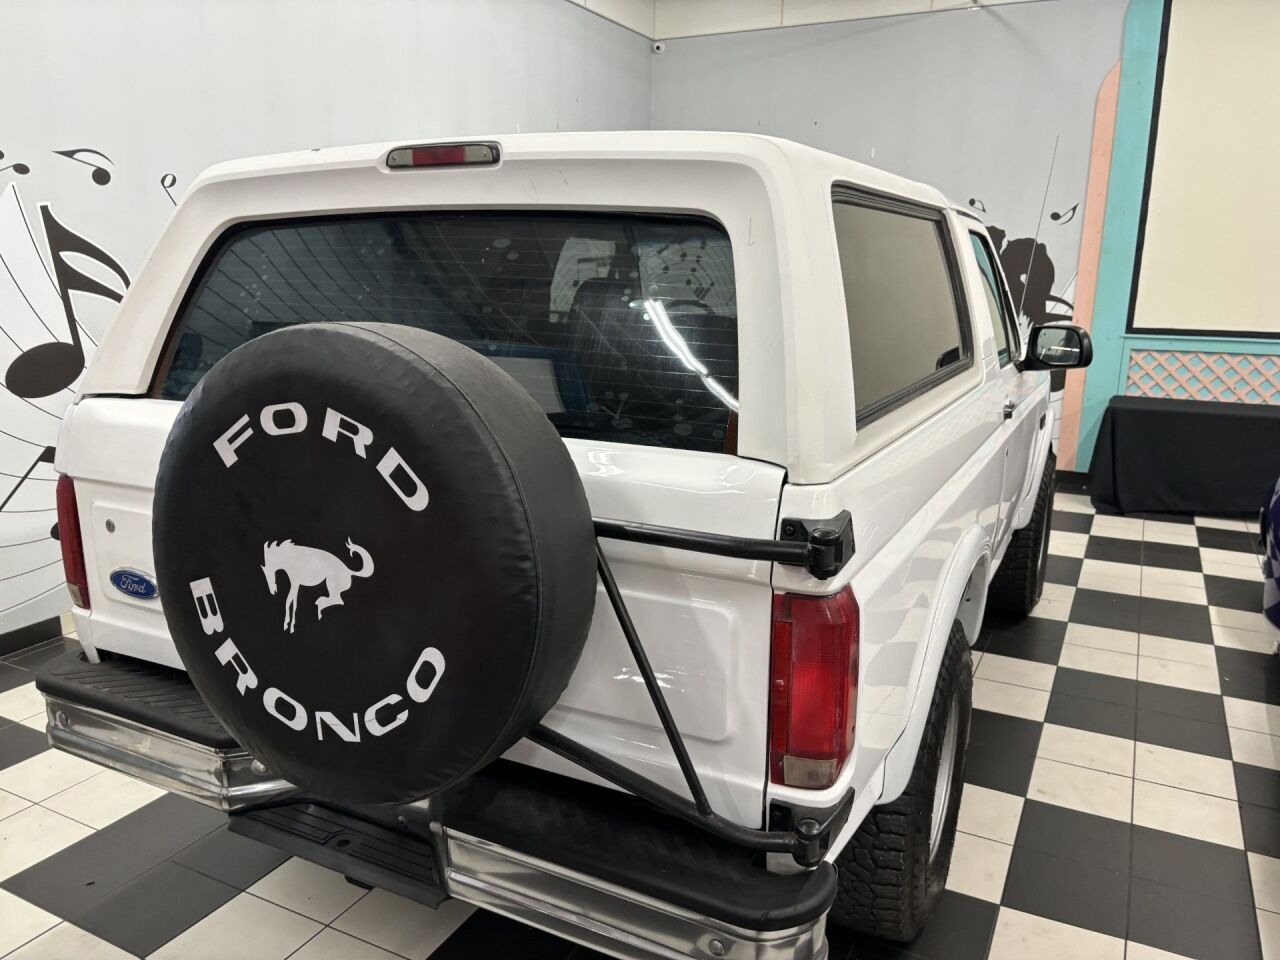 1996 Ford Bronco 6